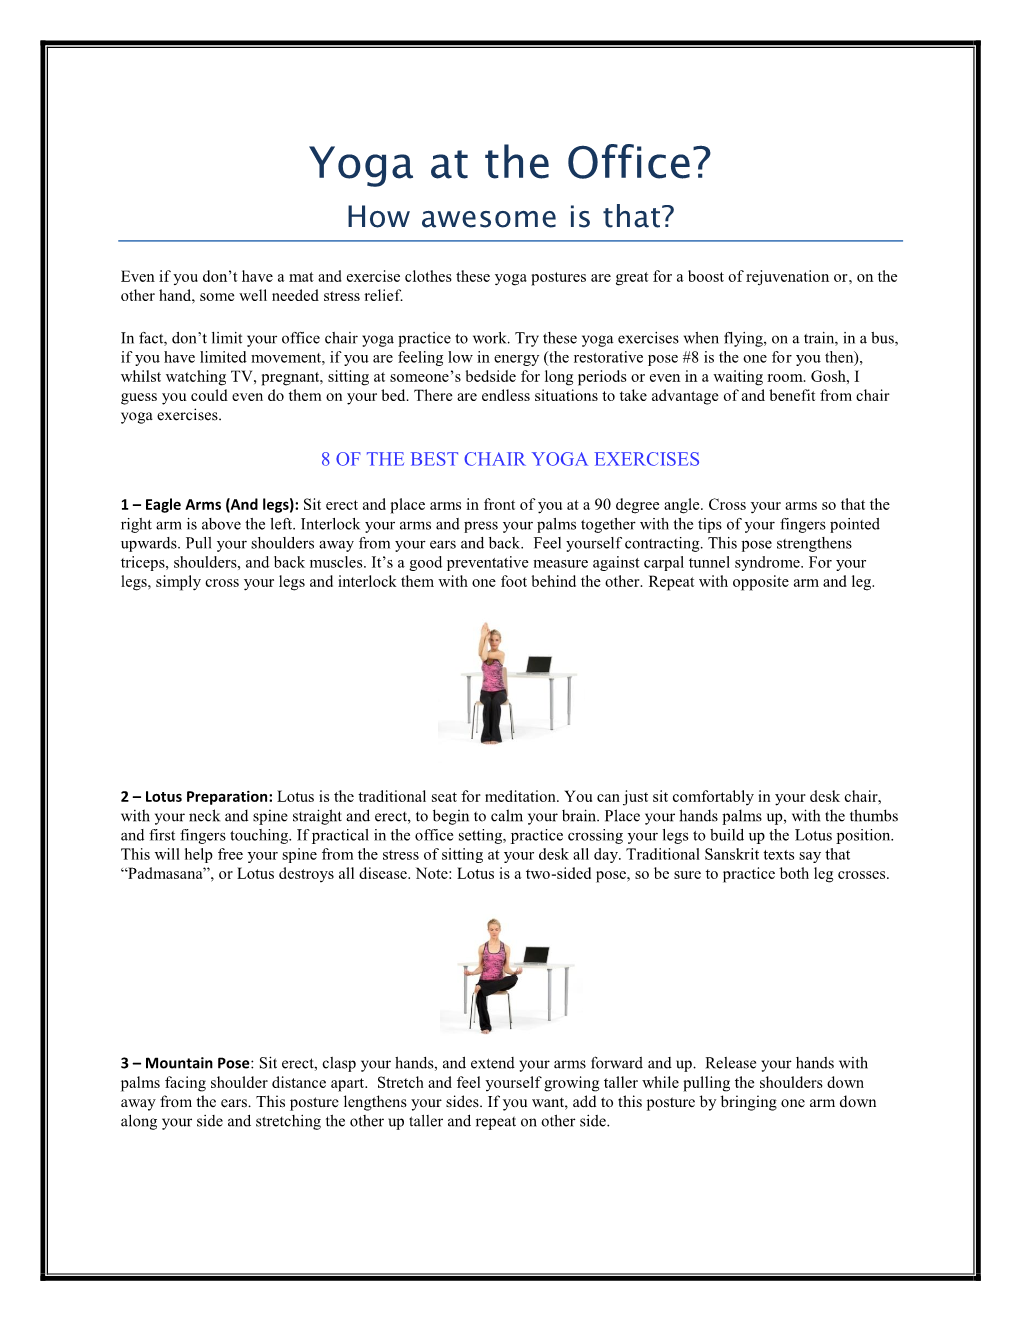 Yoga at the Office? How Awesome Is That?